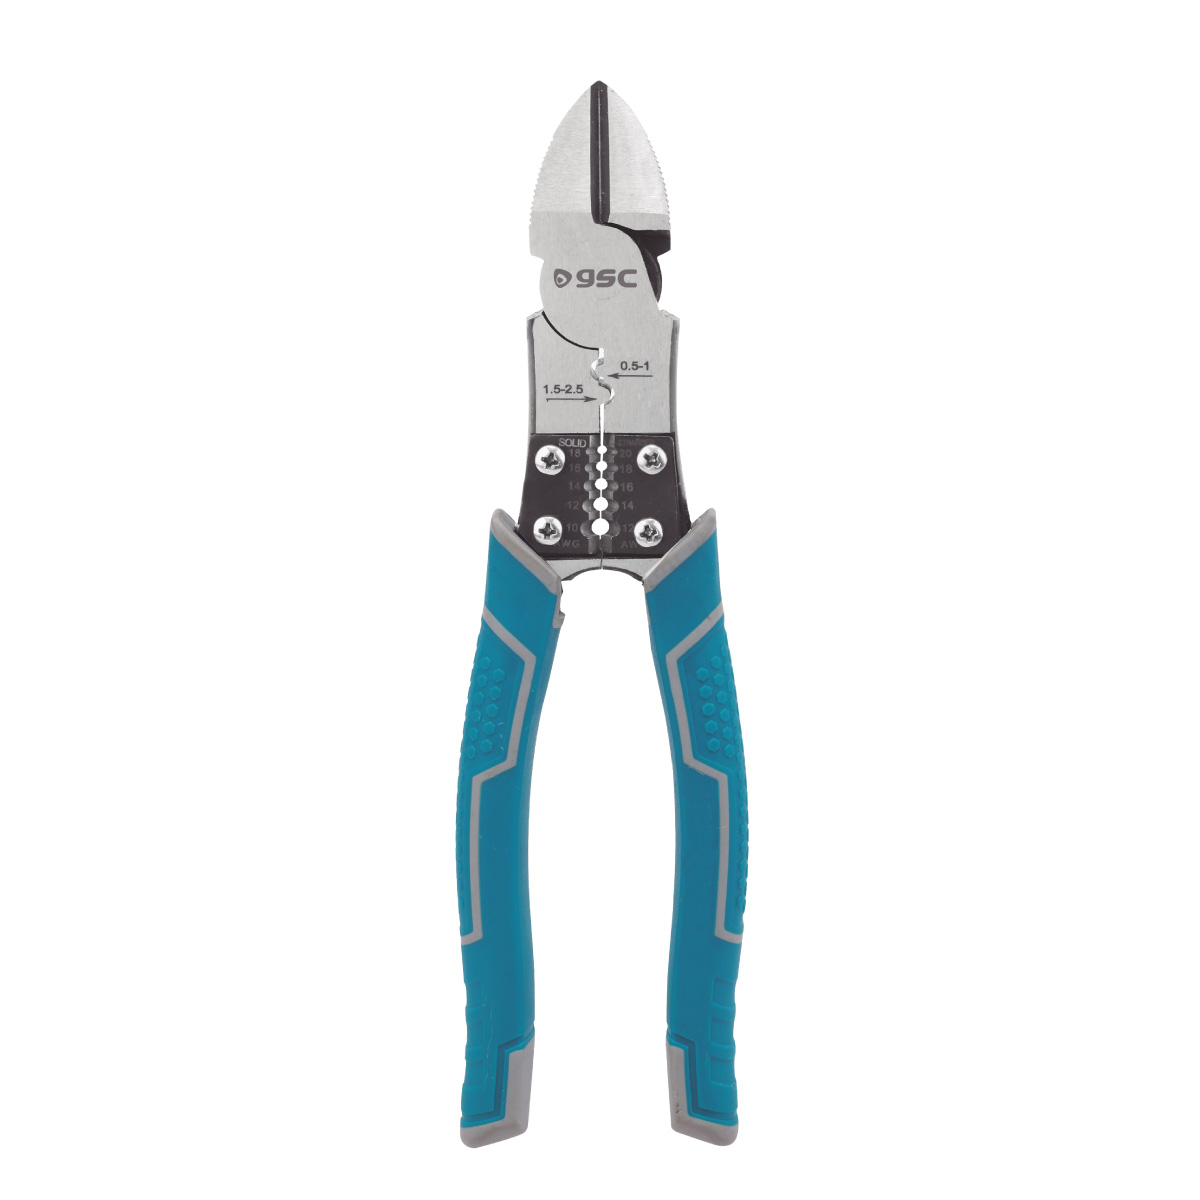 Profesional cutting pliers 200mm with wire stripper and crimping tool